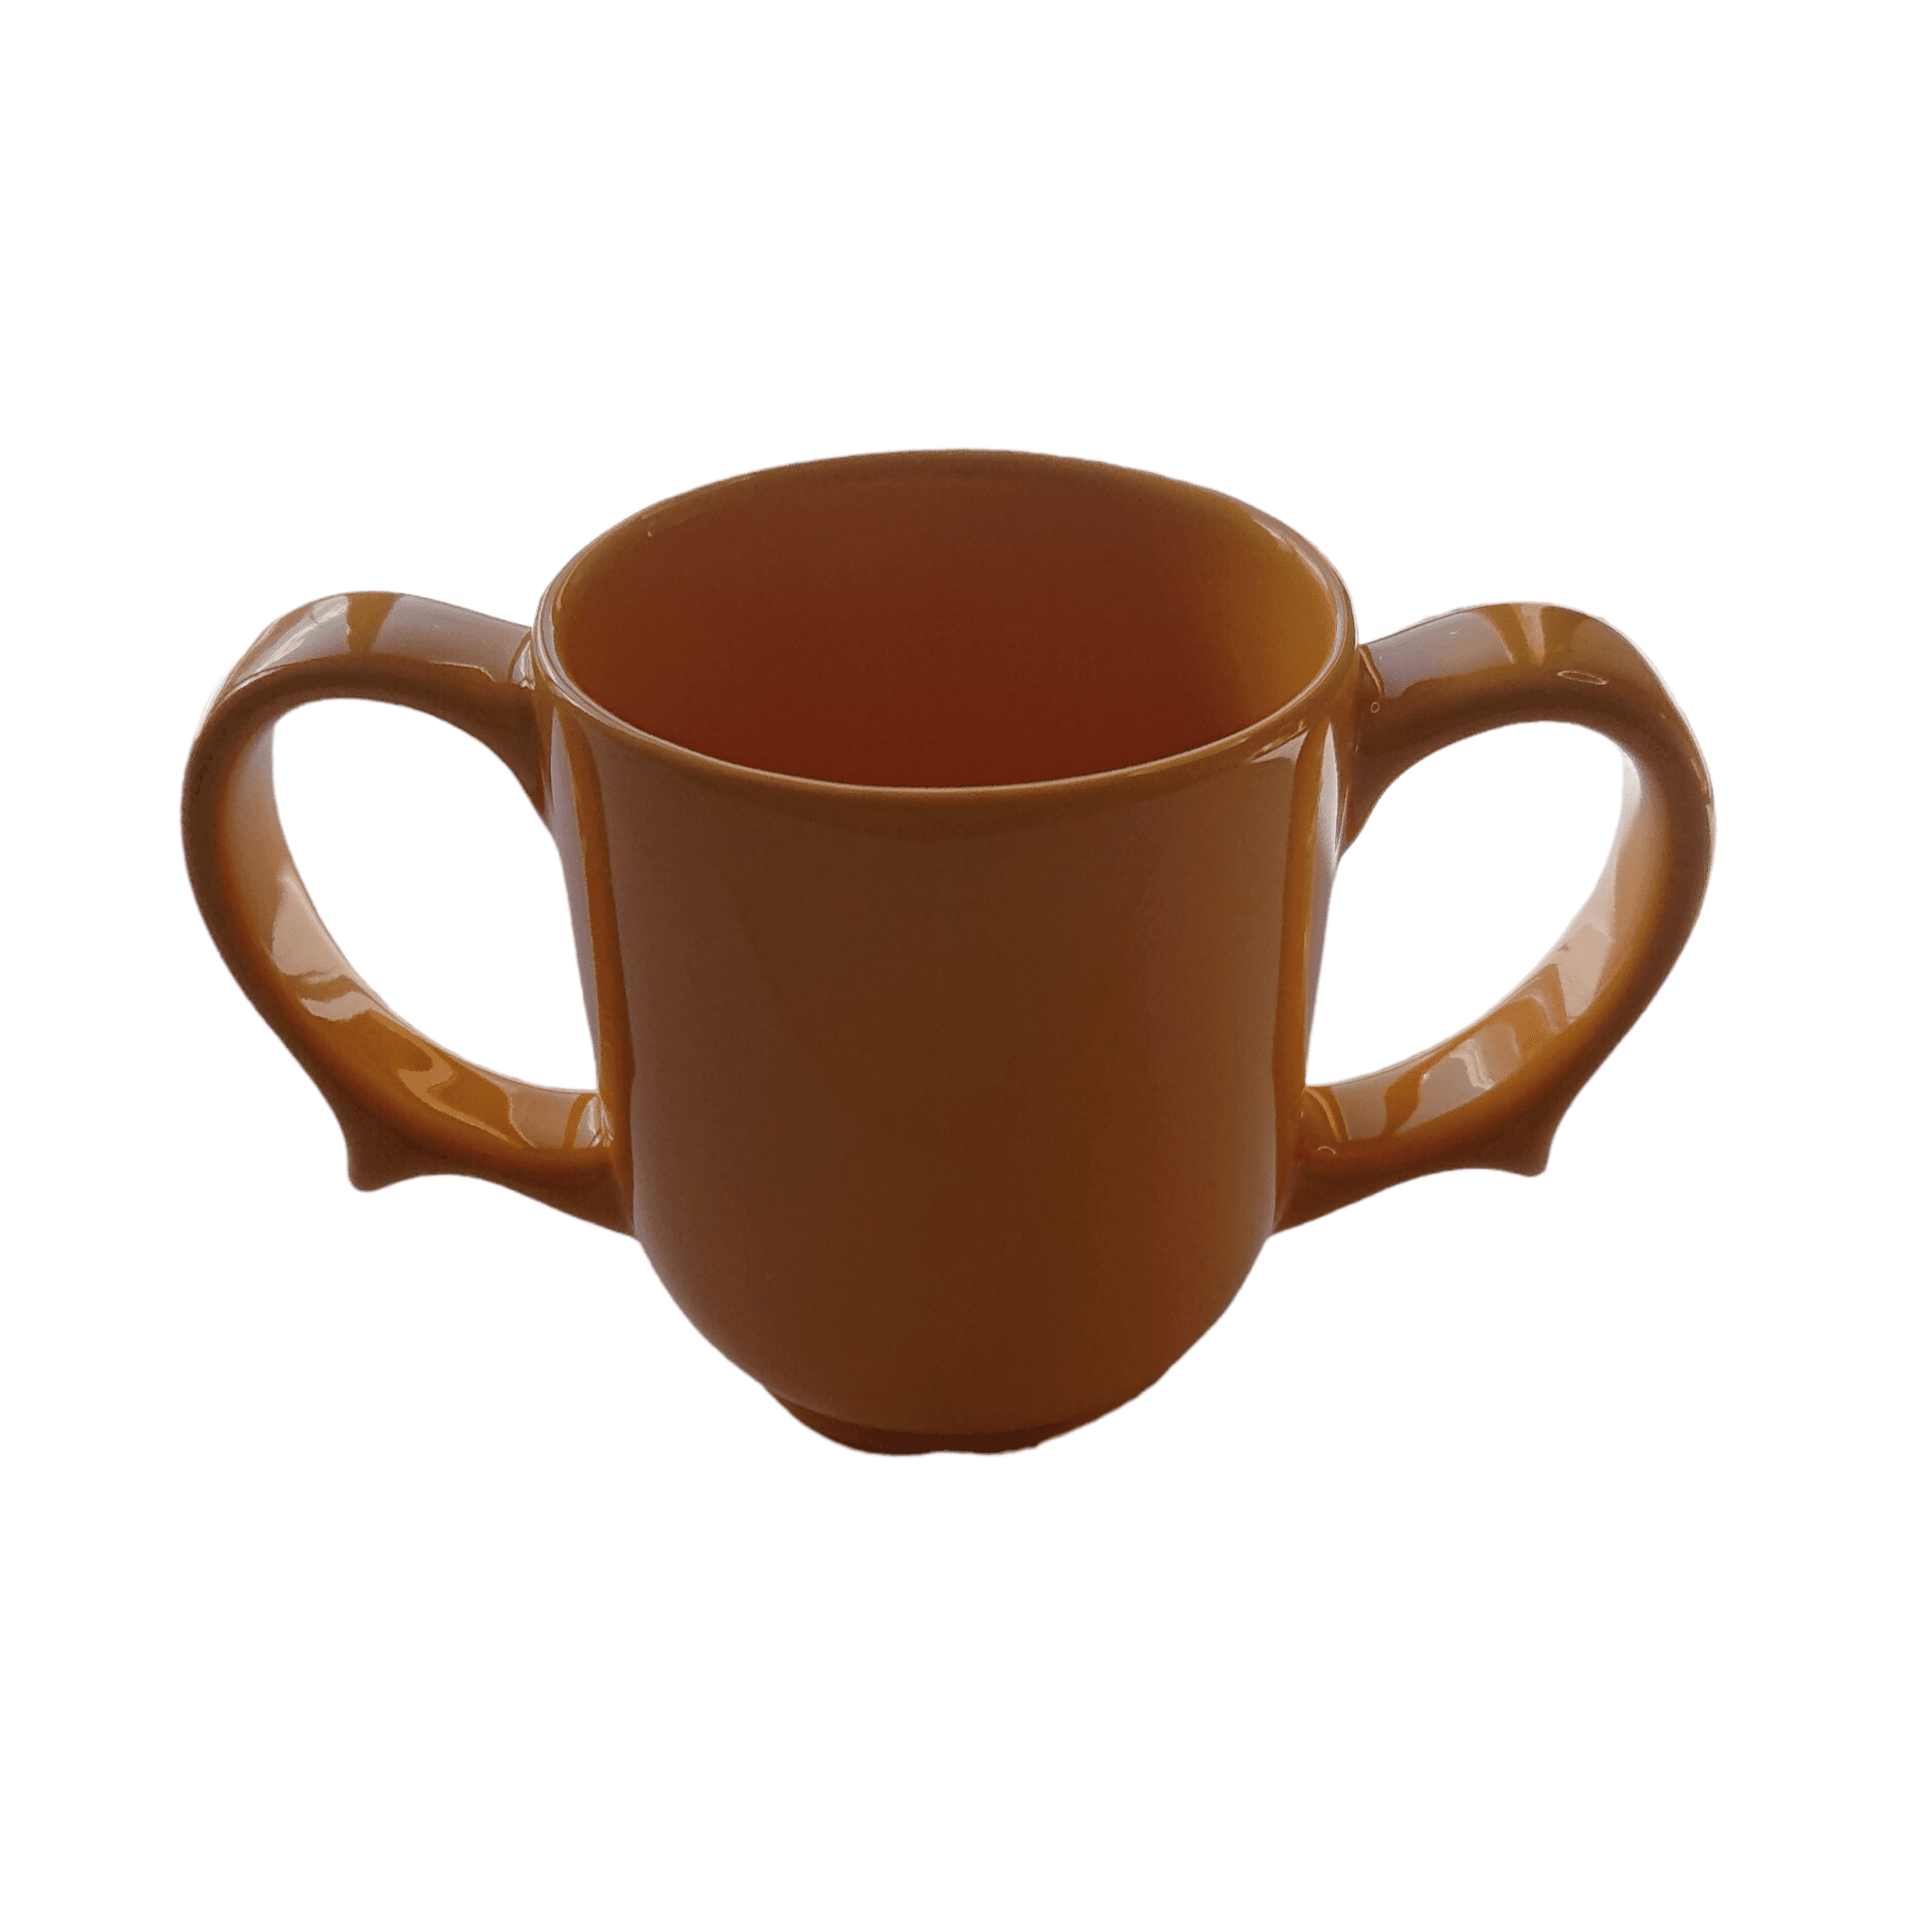 yellow two handled mug. Yellow can make it easier to see the drink